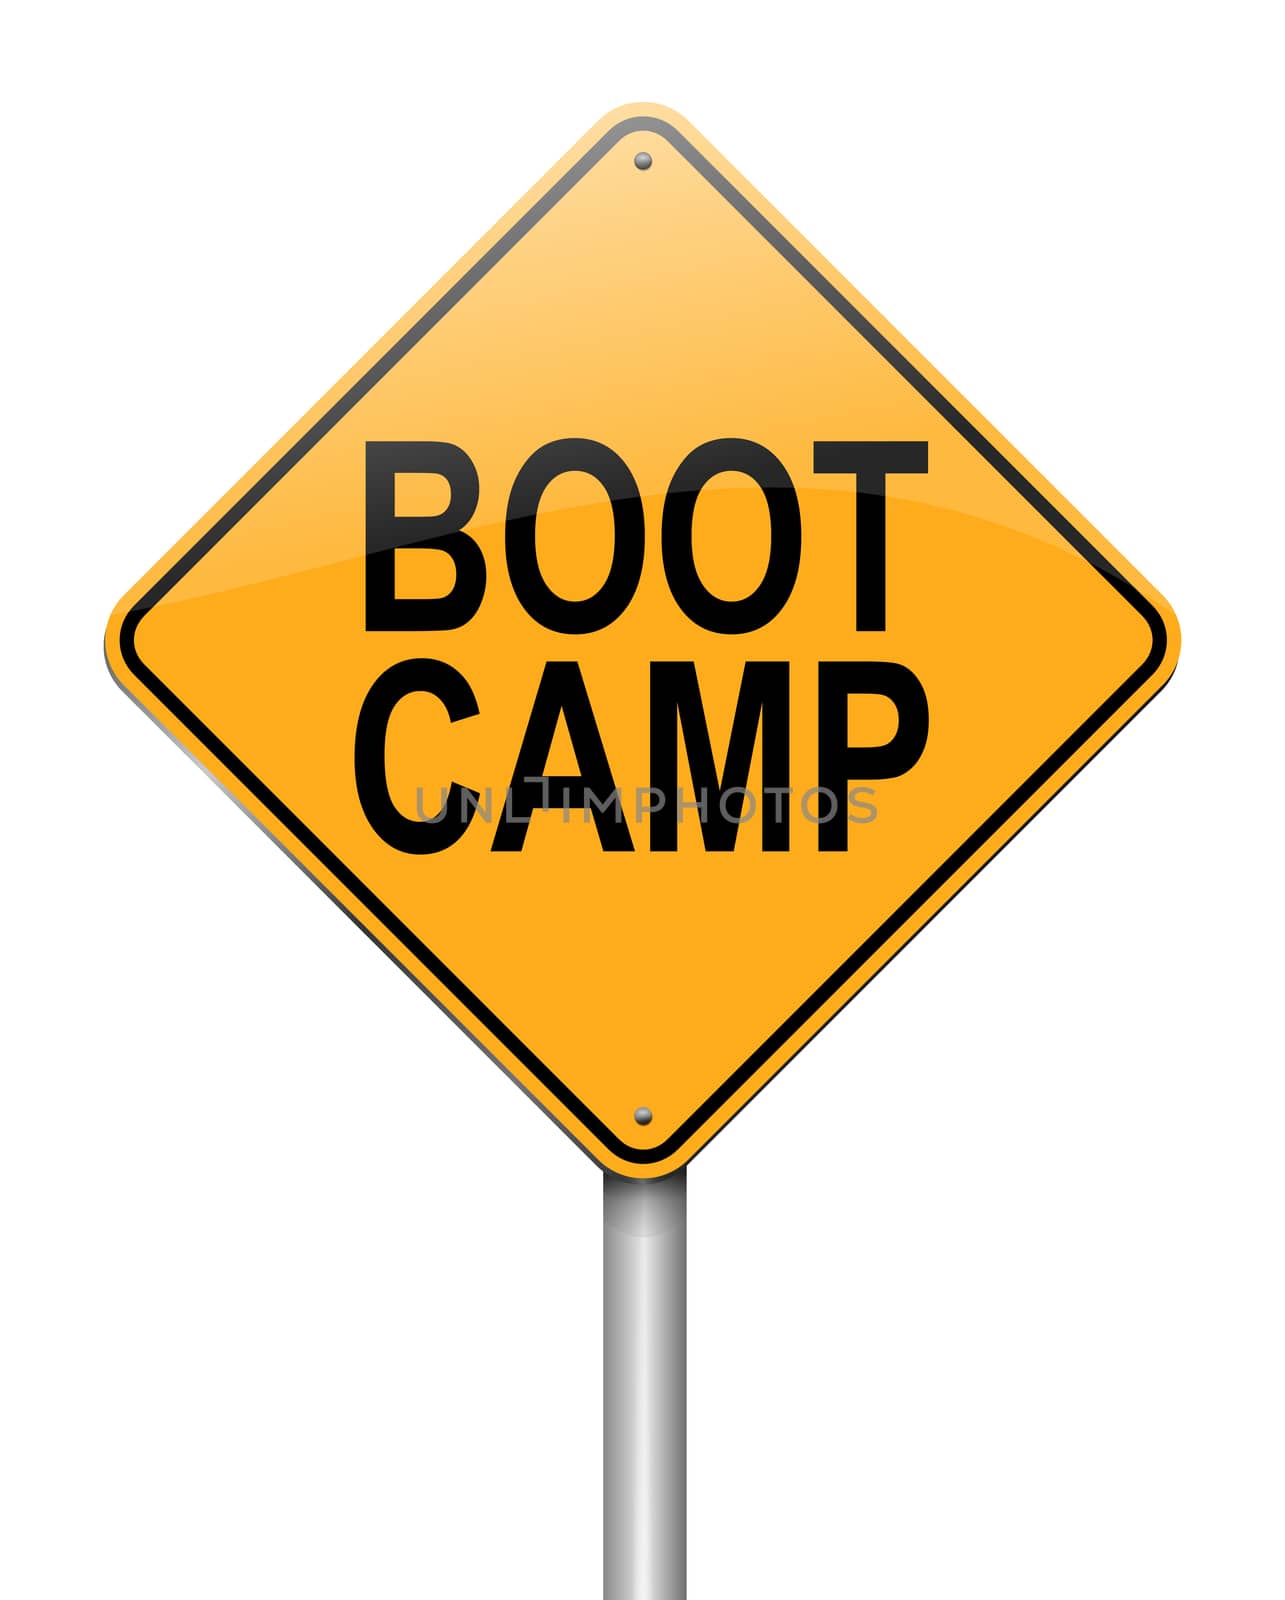 Illustration depicting a sign with a boot camp concept.